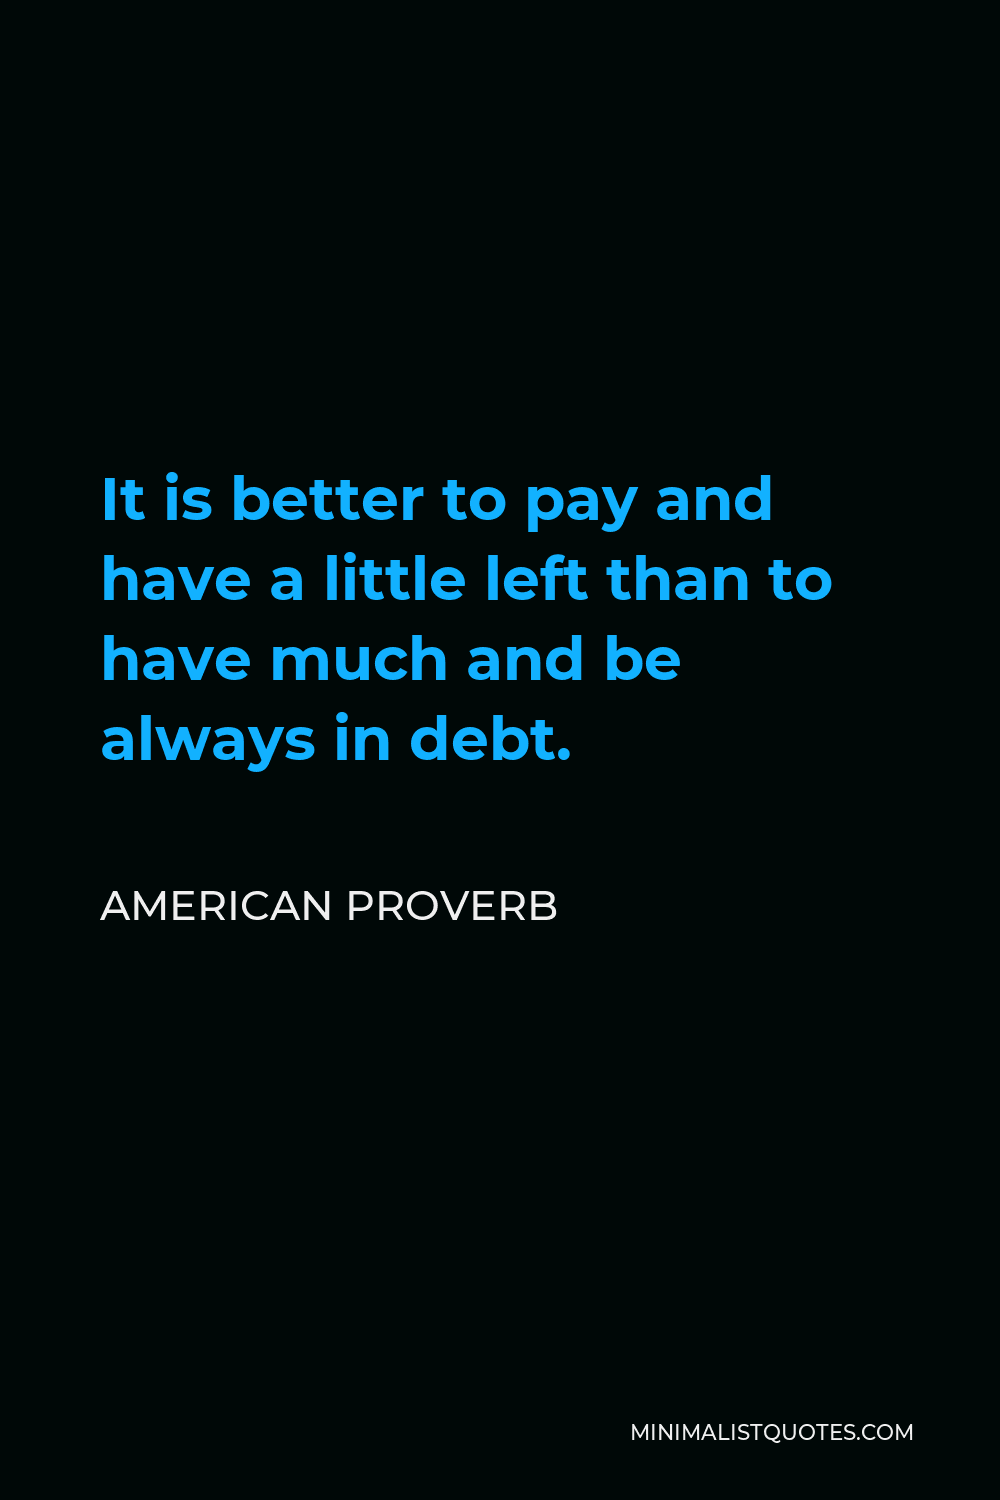 American Proverb Quote - It is better to pay and have a little left than to have much and be always in debt.